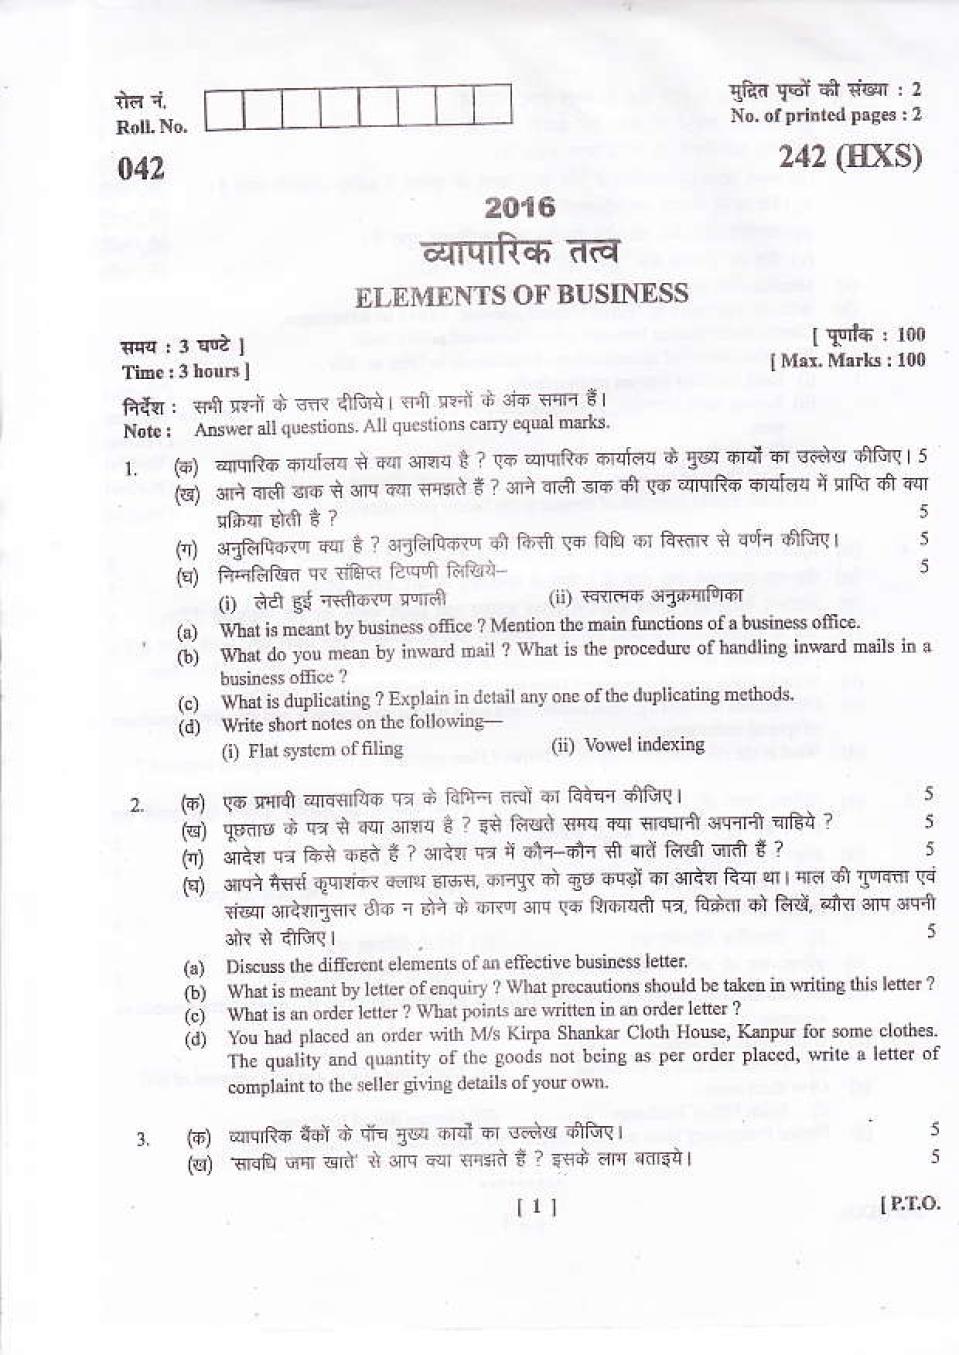 Uttarakhand Board Class 10 Question Paper 2016 for Elements of Business - Page 1